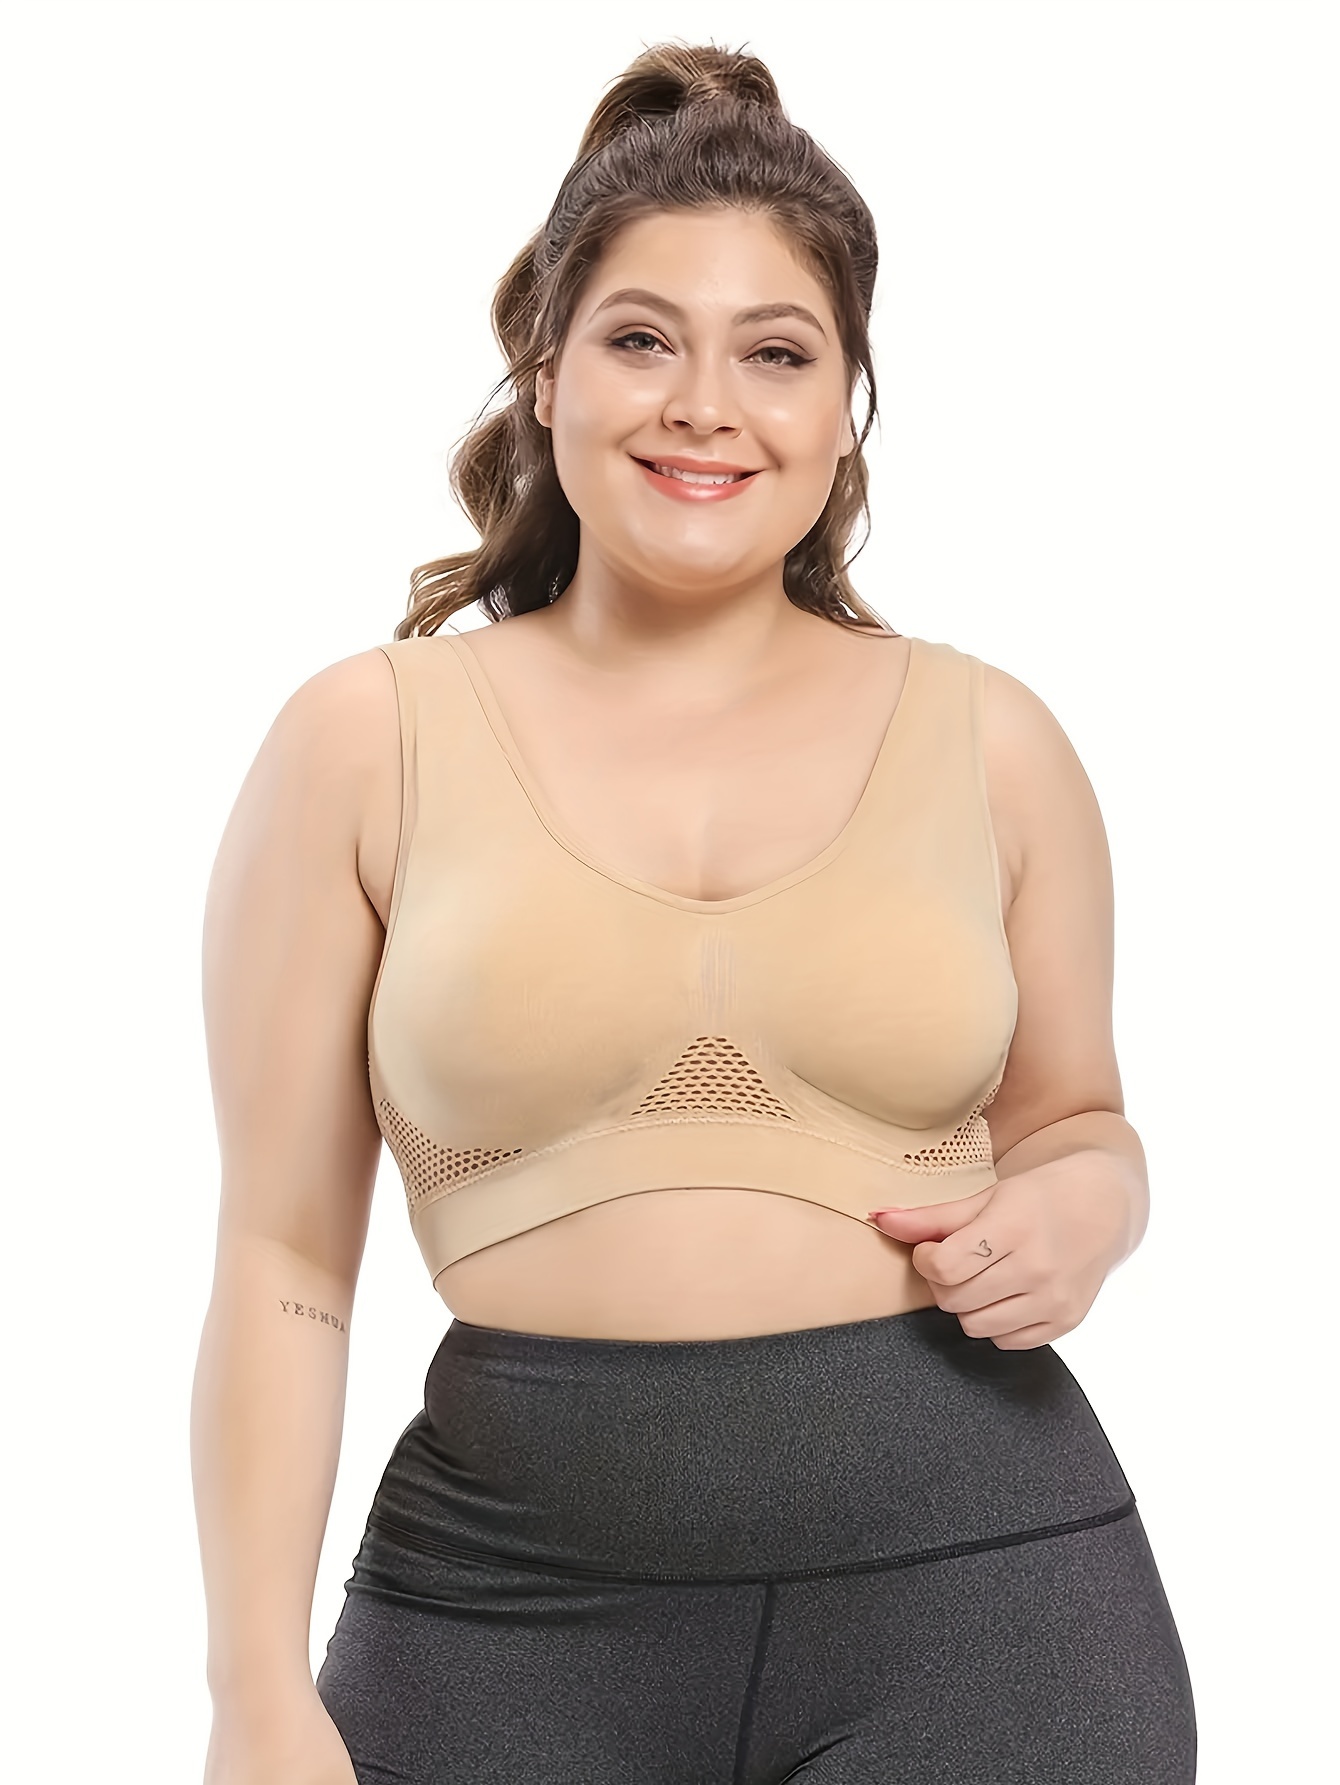 Plus Size Women's Full Coverage High Impact Seamless Workout